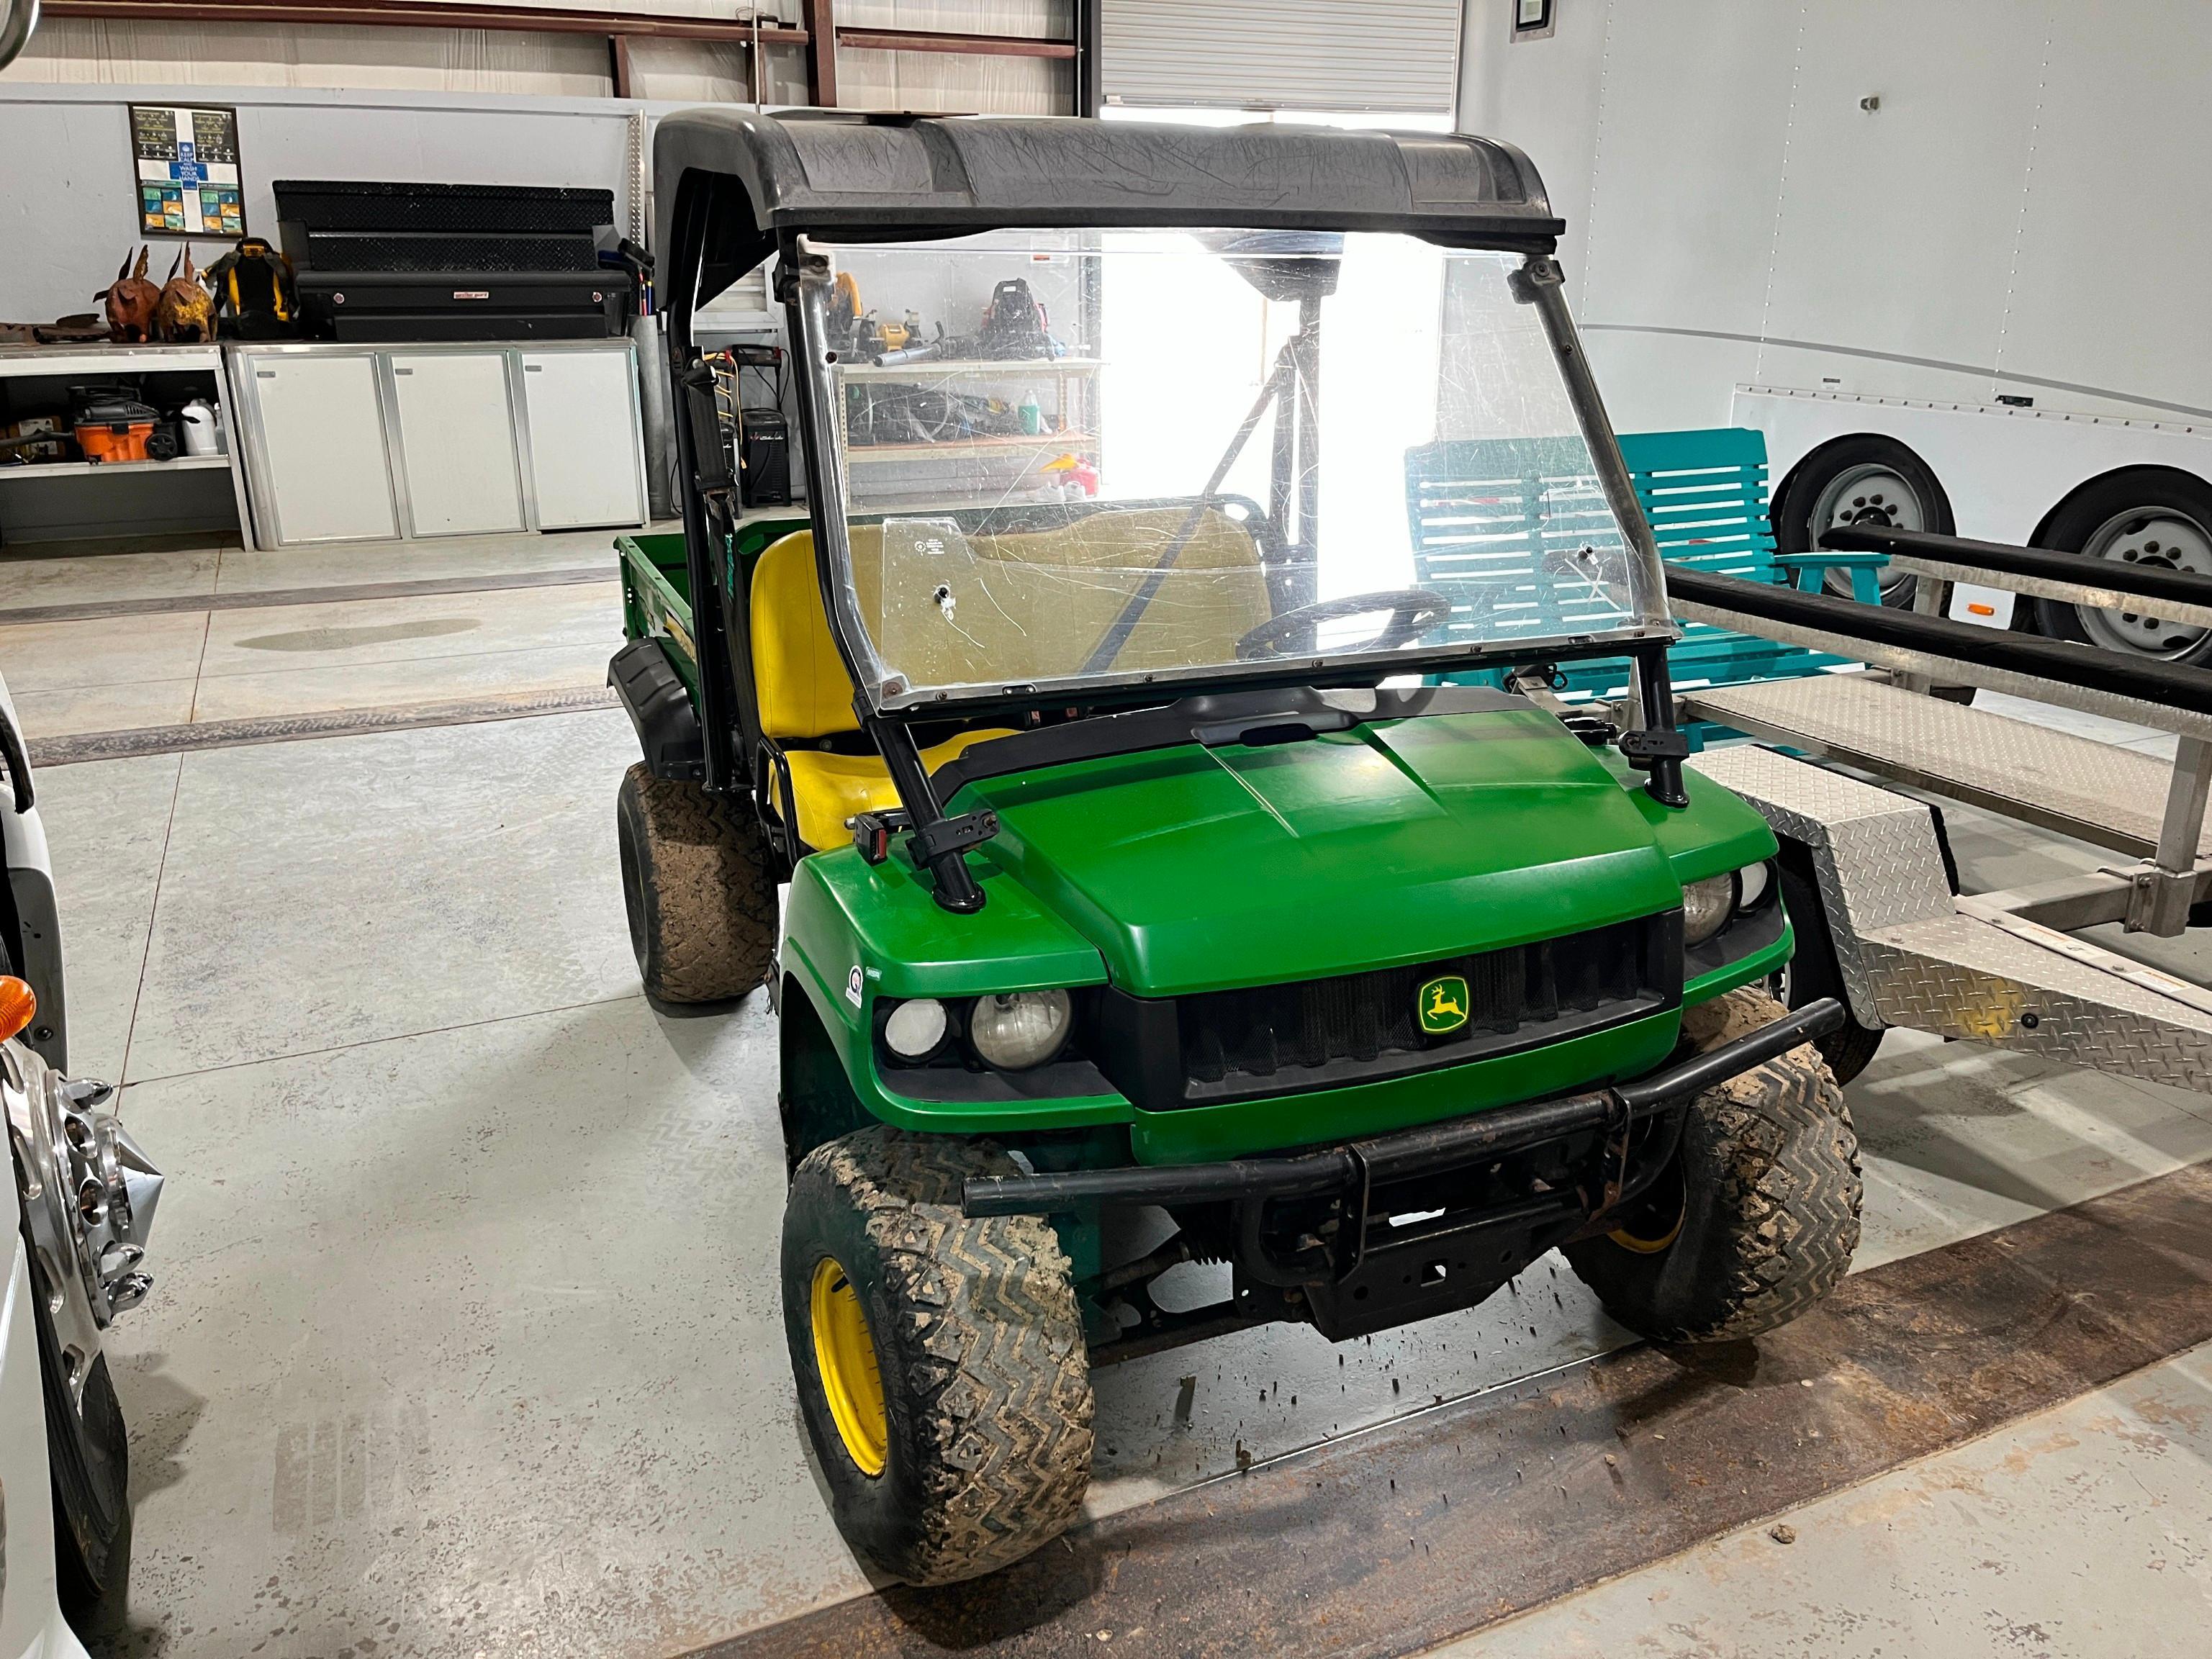 2015 JOHN DEERE GATOR HPX UTILITY VEHICLE VN:1M0HPXGSTFM130469 4x4, powered by gas engine, equipped